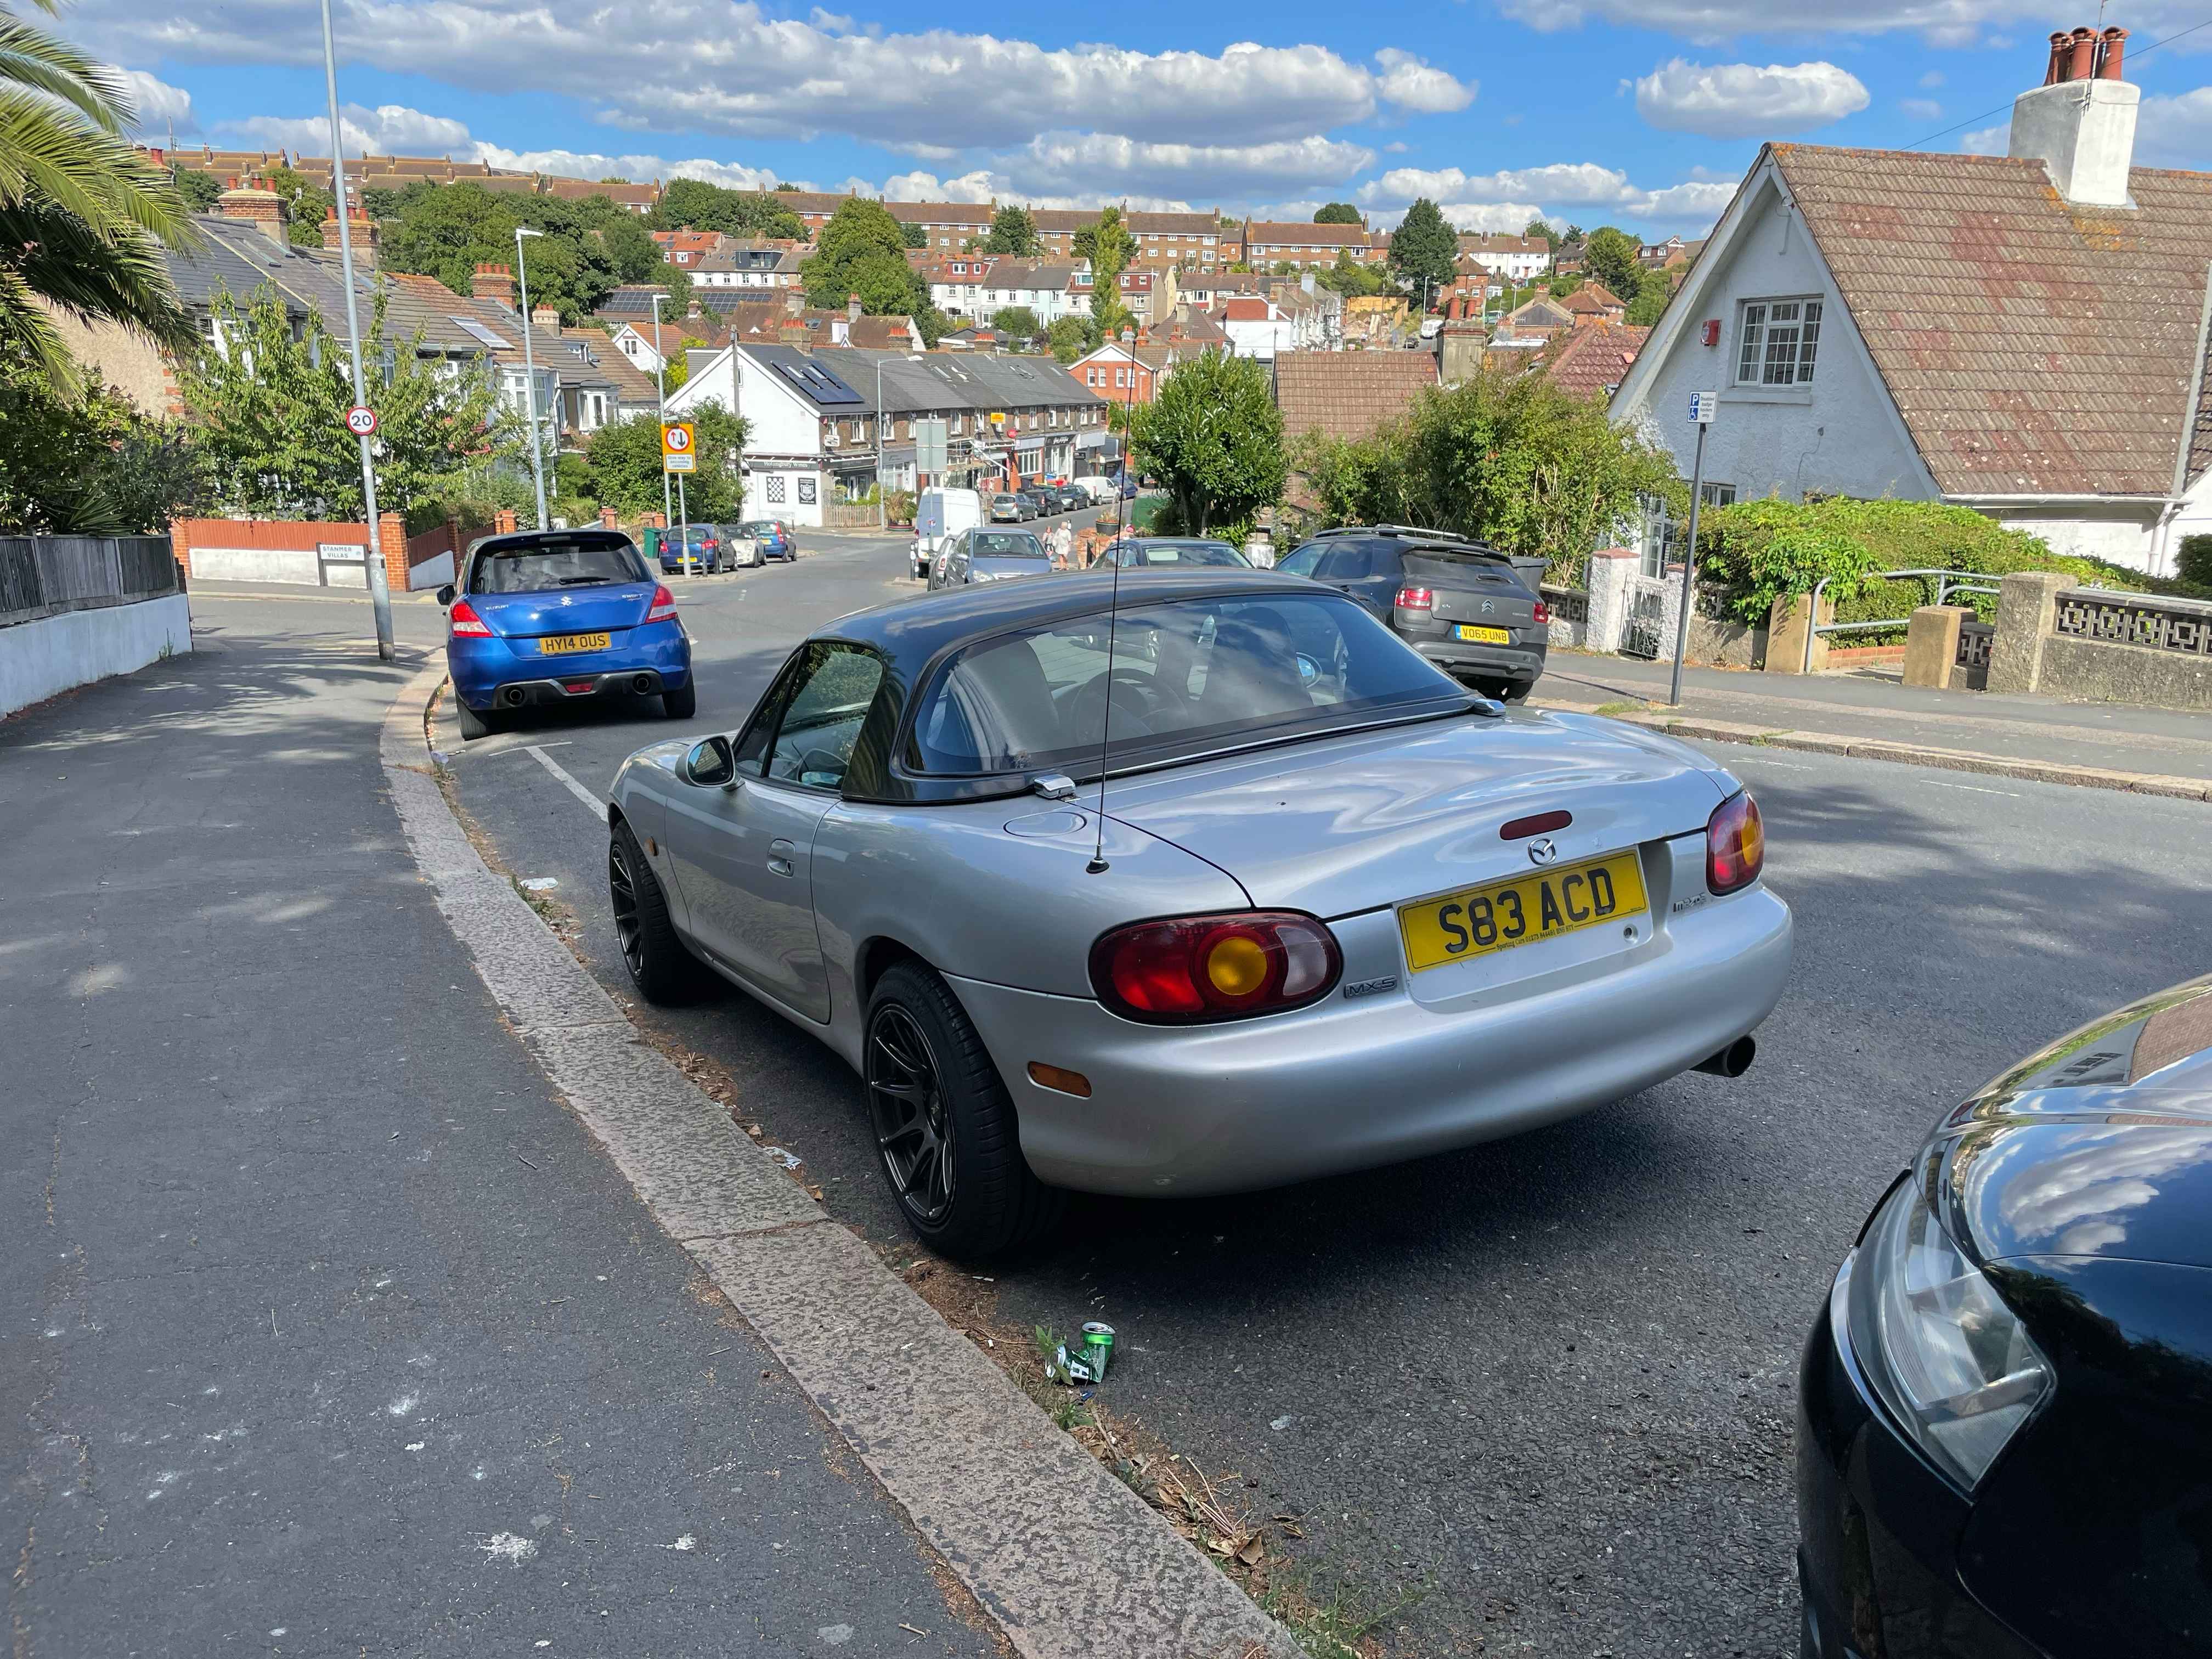 Photograph of S83 ACD - a Silver Mazda MX-5 parked in Hollingdean by a non-resident. The second of two photographs supplied by the residents of Hollingdean.